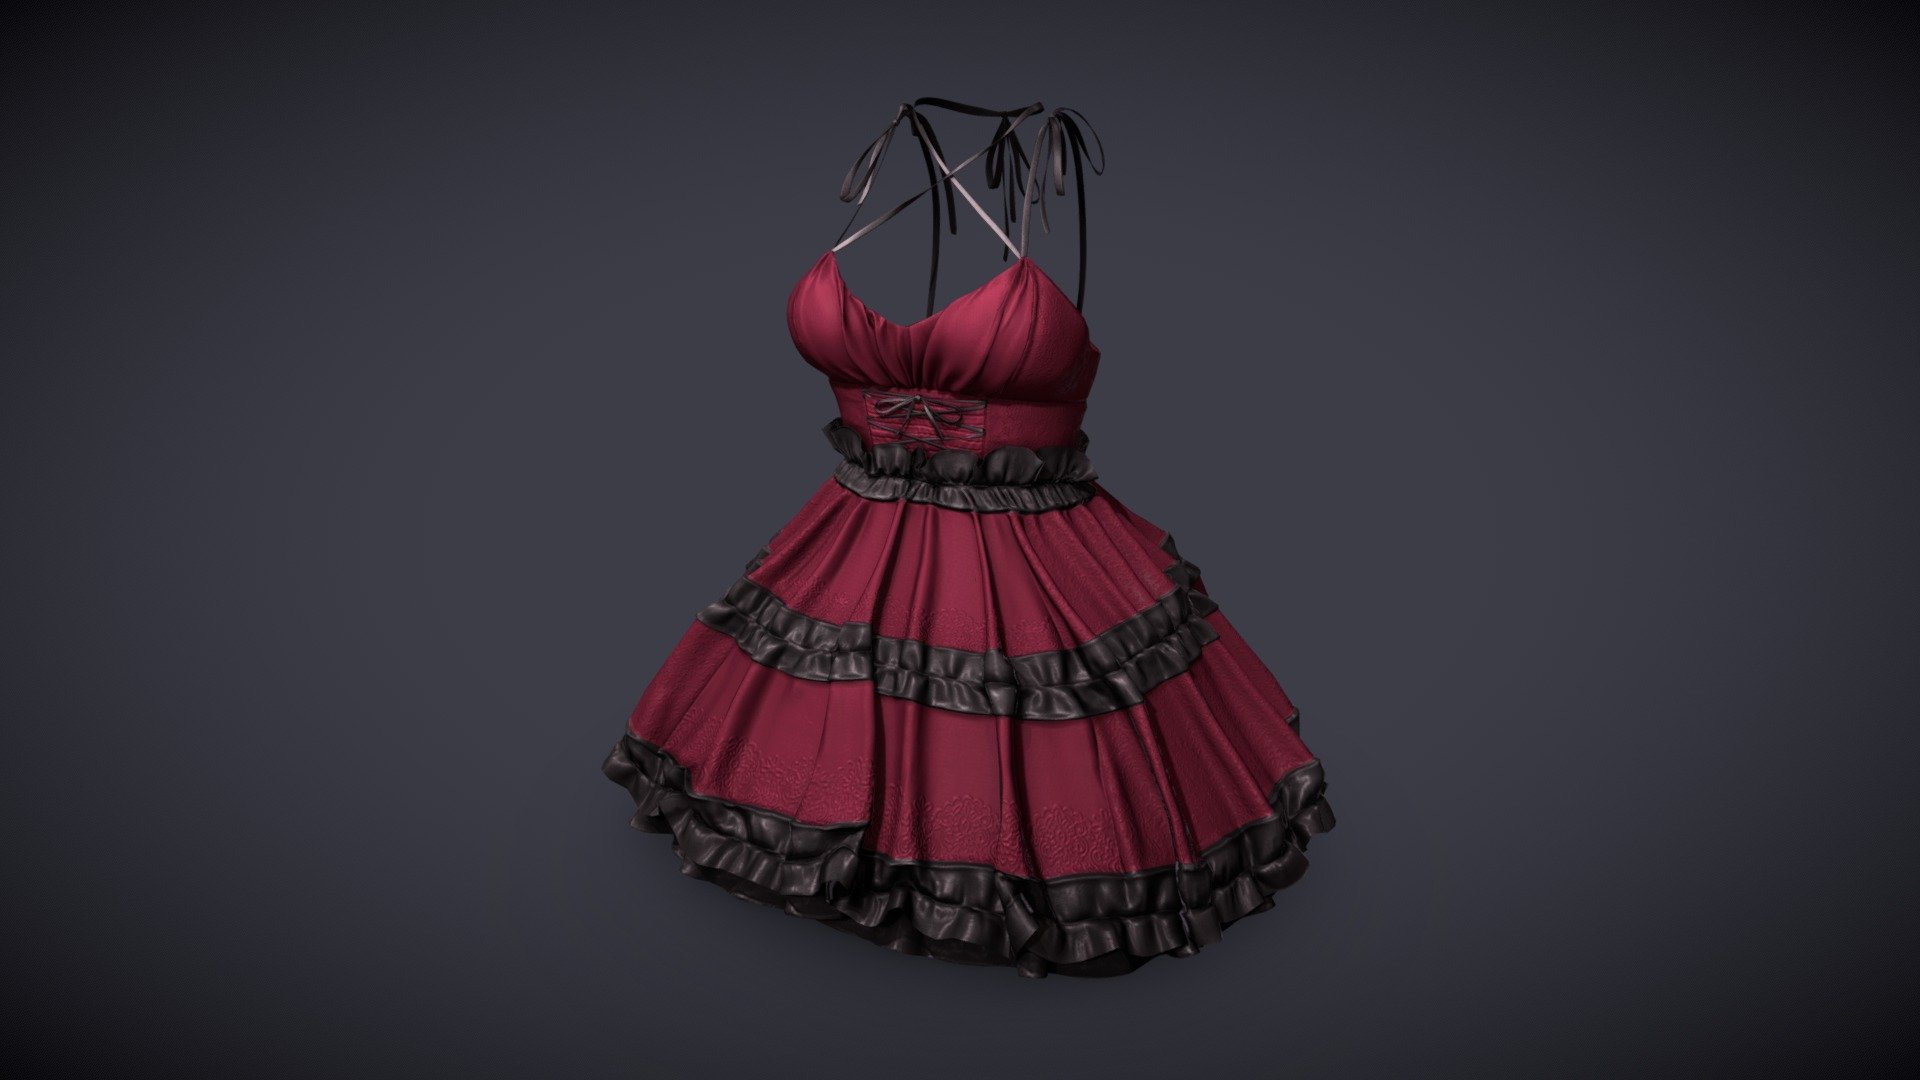 Created with Marvelous Designer, Zbrush, and Maya for the virtual world fashion brand Sweet Thing. on the metaverse platform Second Life. I designed the original concept, 3D model, textures, and skinned this garment to fit the most popular avatar bodies on the platform.

Baked lighting and 1024 px textures for performance 3d model